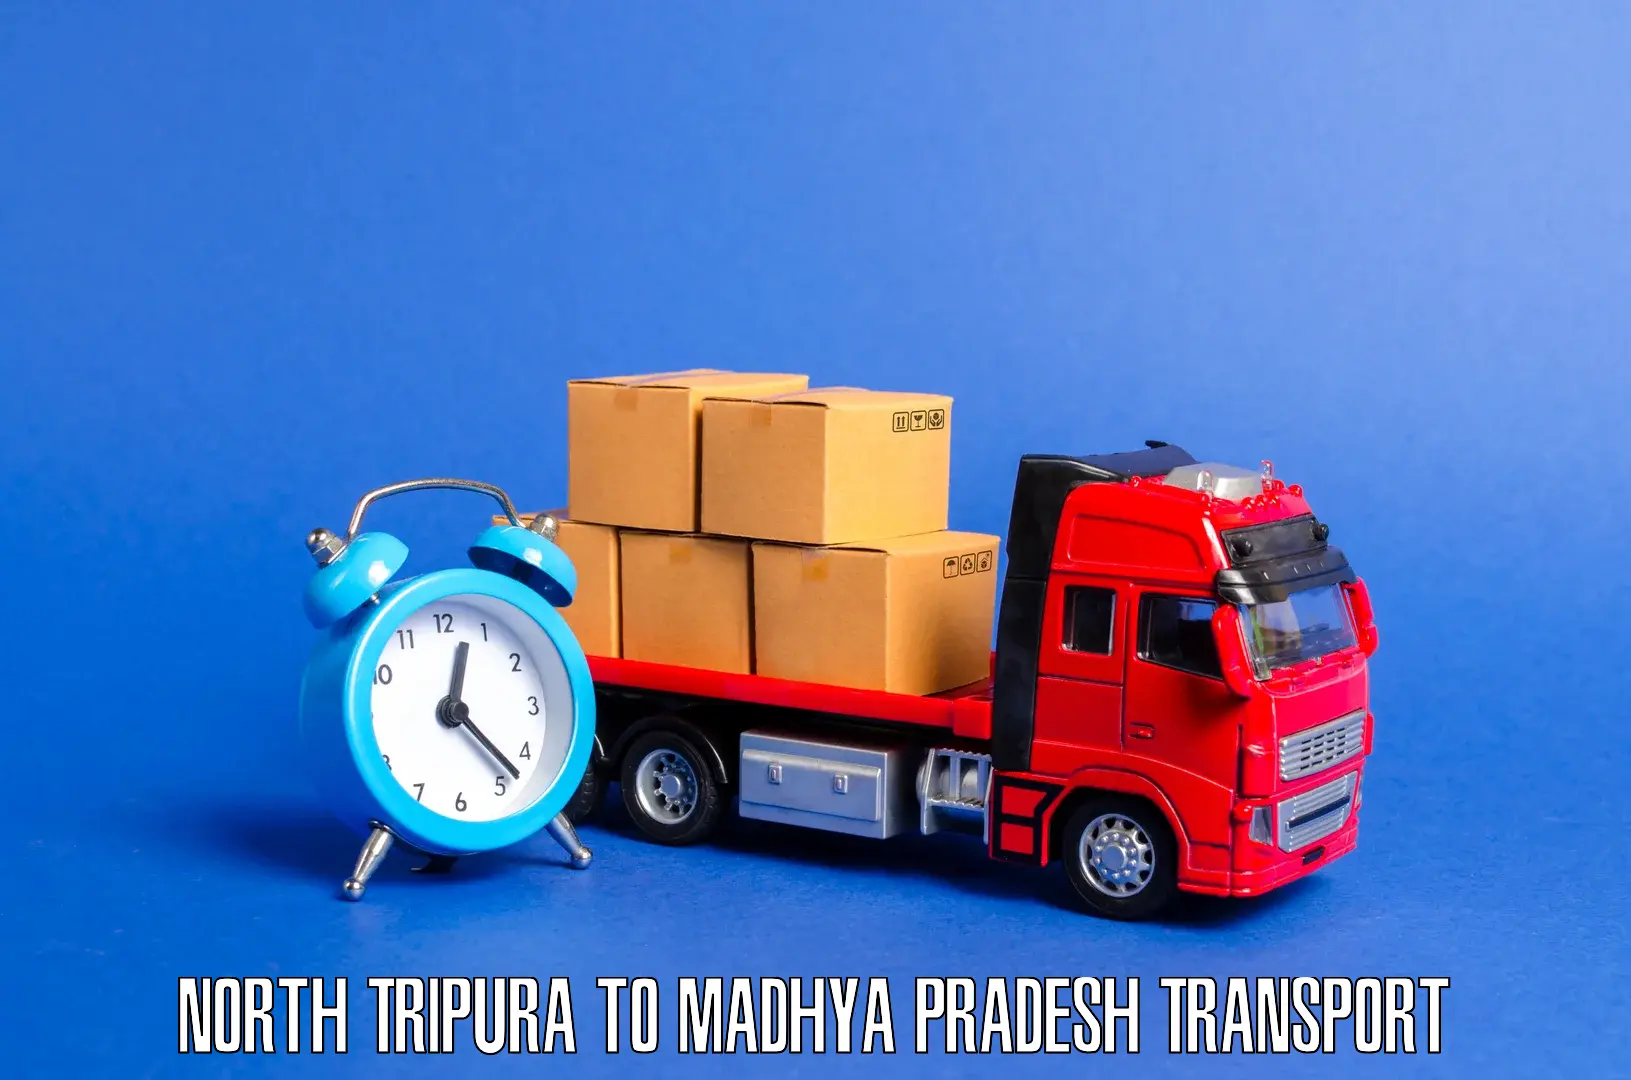 Daily transport service in North Tripura to Sehore